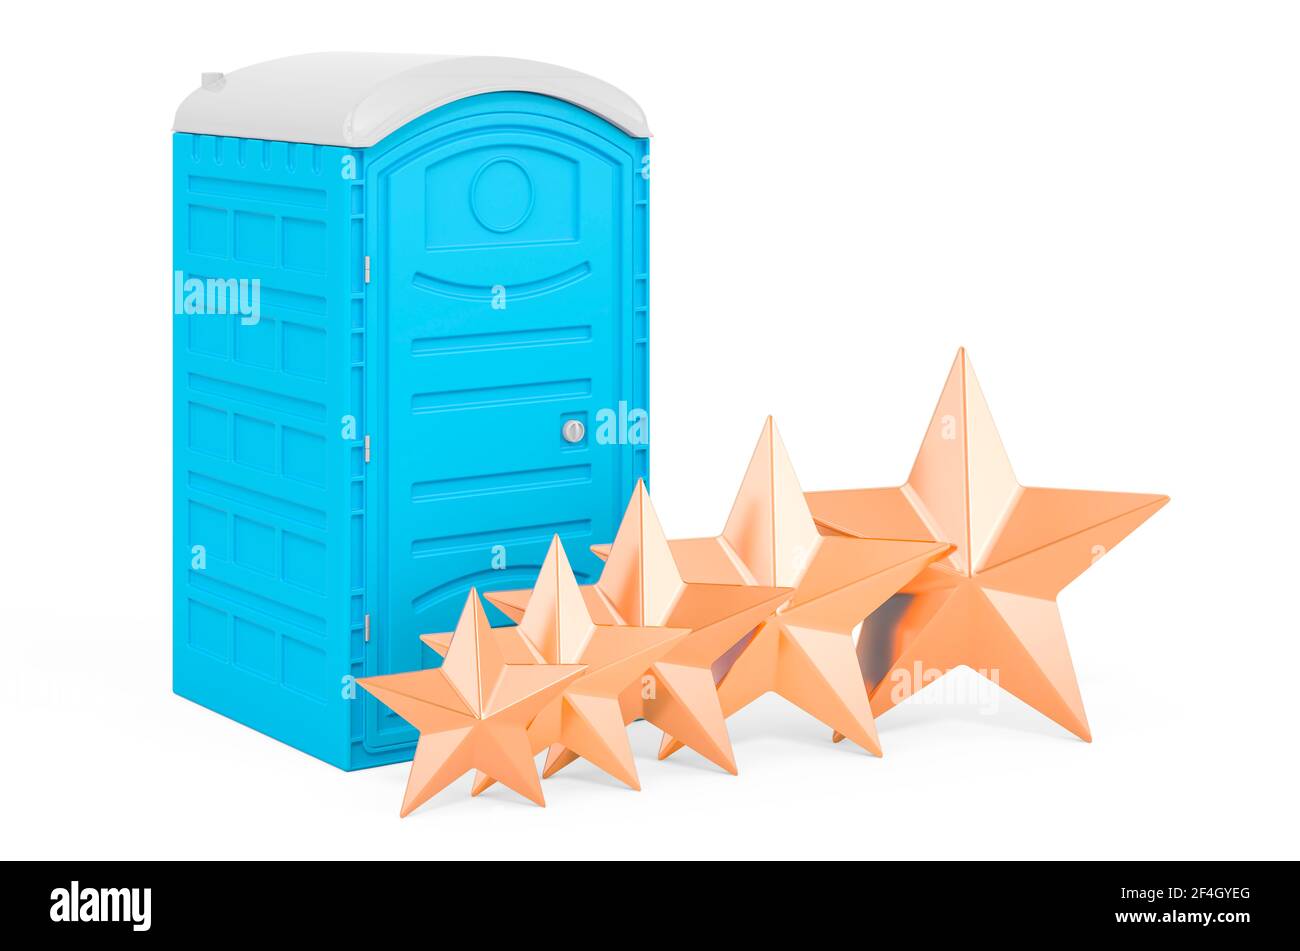 Customer rating of portable plastic toilet cabin. 3D rendering isolated on white background Stock Photo